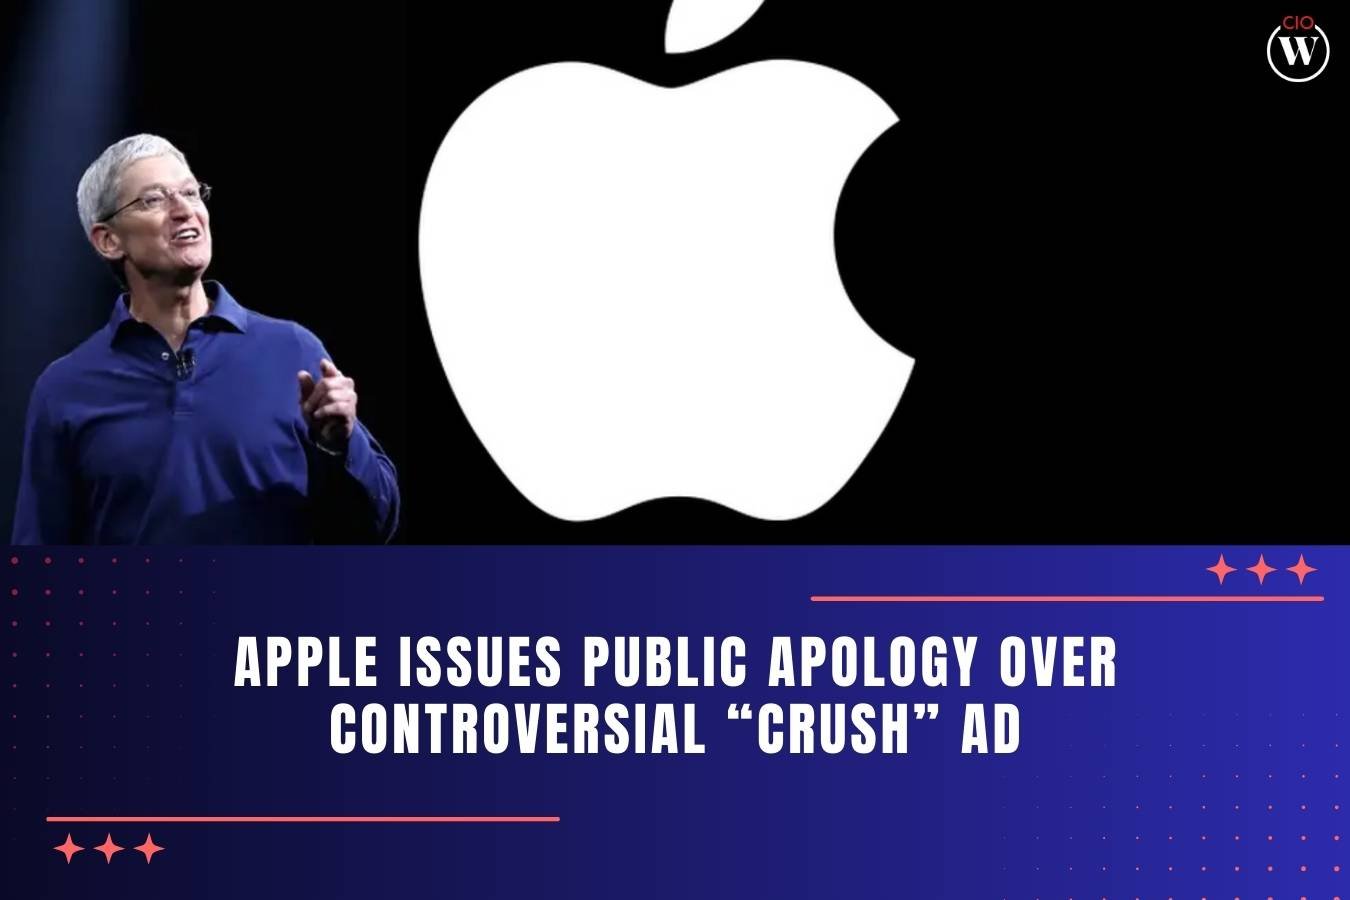 Apple Issues Public Apology Over Controversial “Crush” Ad